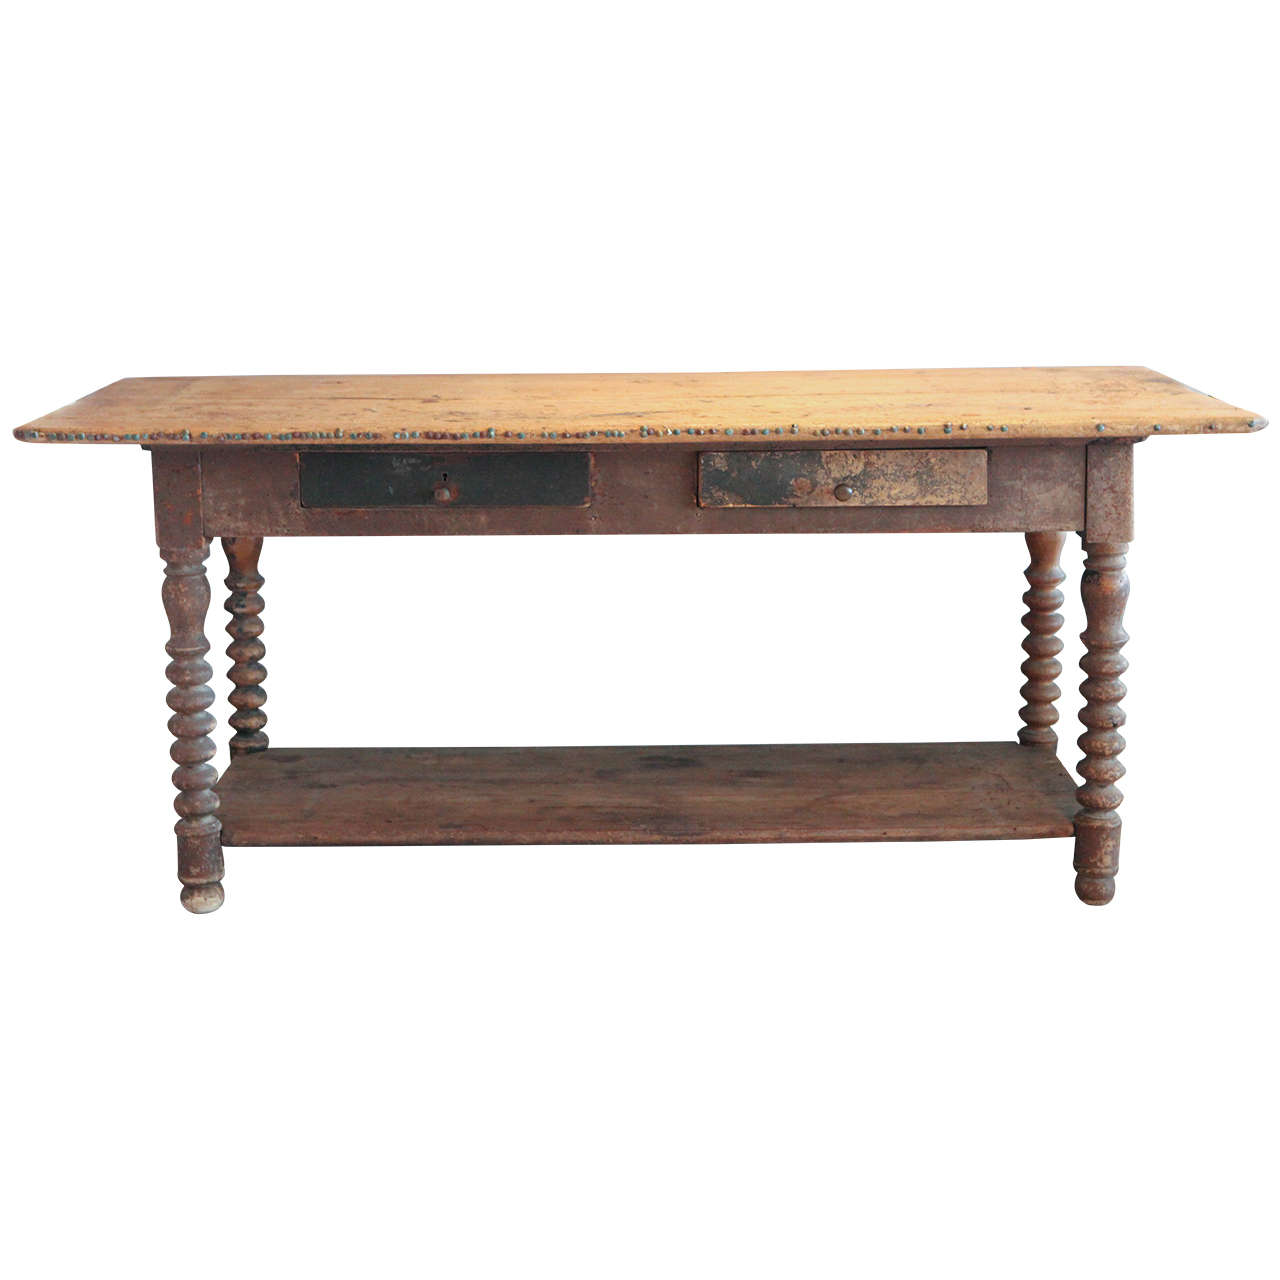 French Turned Leg Console Table, Late 18th Century